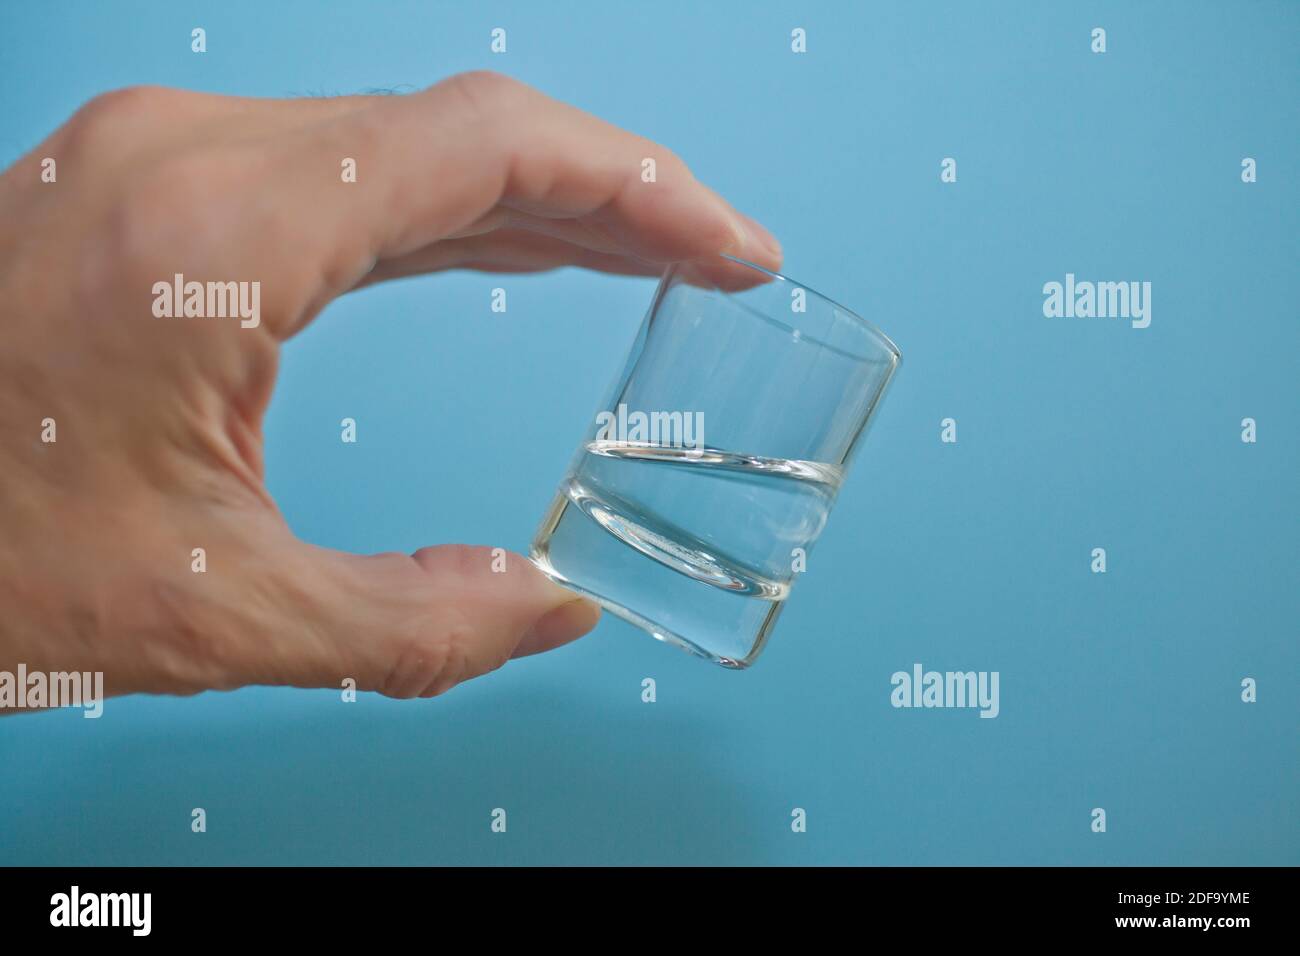 18 ml of water in small glass tumbler hand-held Stock Photo